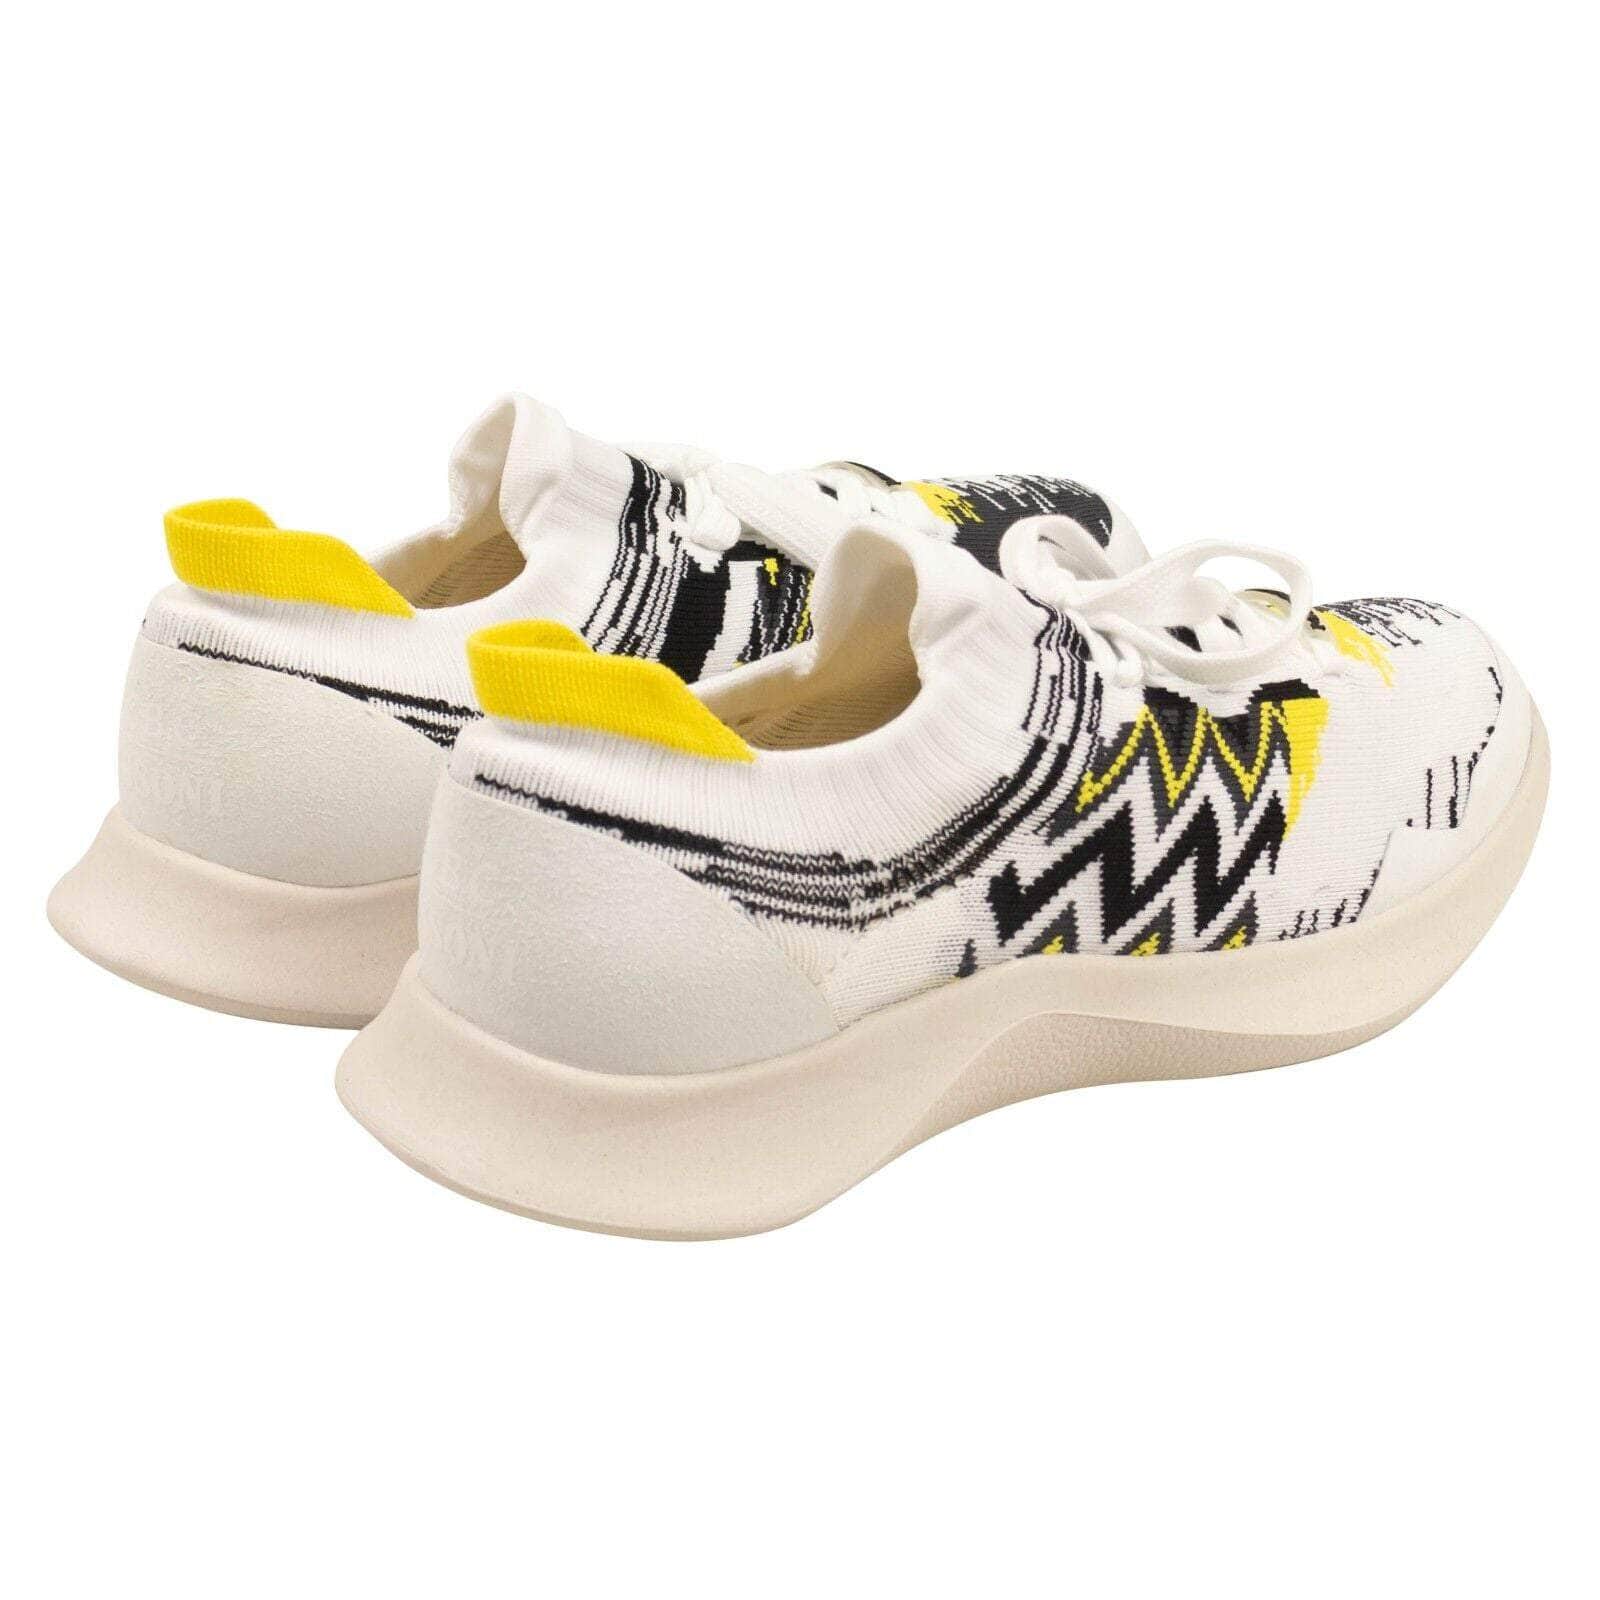 MISSONI 250-500, channelenable-all, chicmi, couponcollection, gender-mens, main-shoes, mens-shoes, missoni, size-40, size-41, size-42, size-43, size-44, size-45, size-46, size-47 White And Black ACBC Fly Knit Chevron Low Top Sneakers